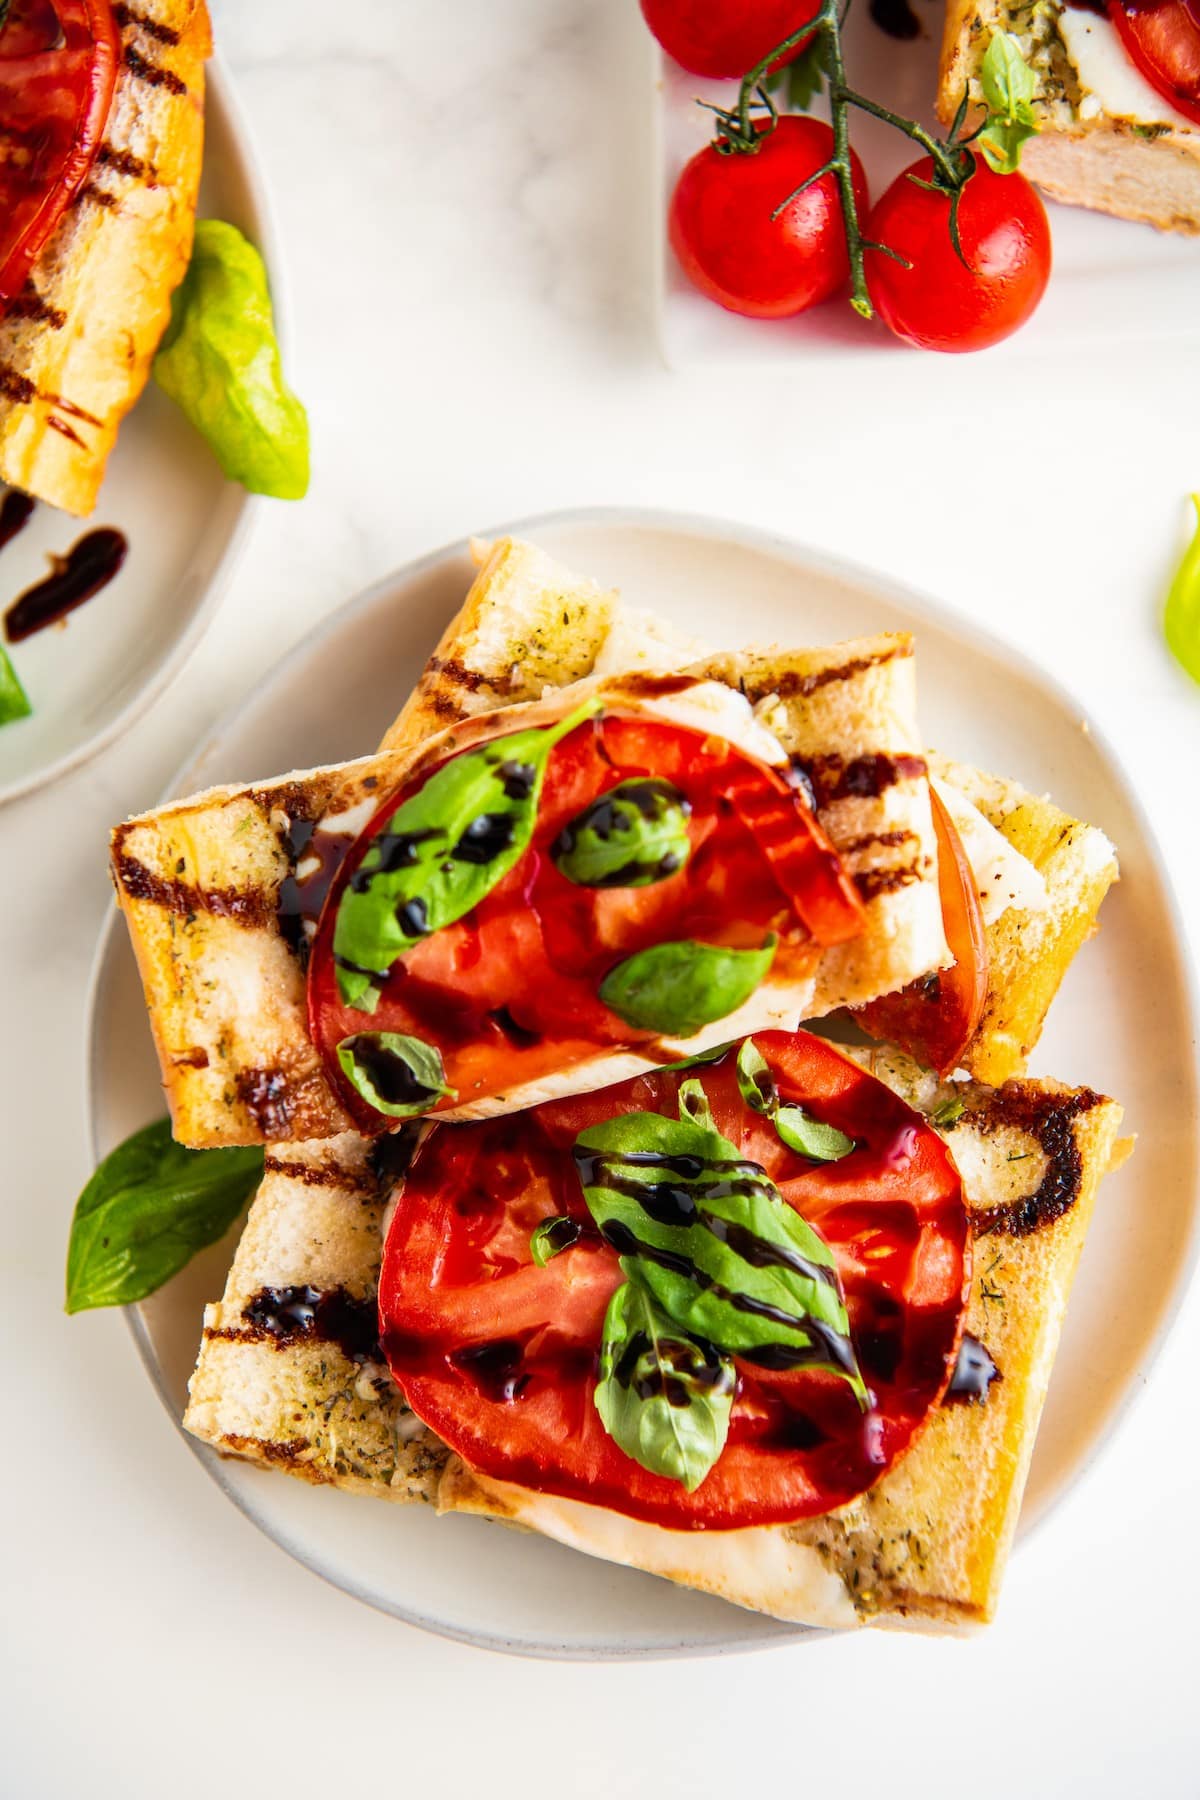 Overhead view of a plate with 3 slices of Caprese sandwiches on it, next to some fresh tomatoes